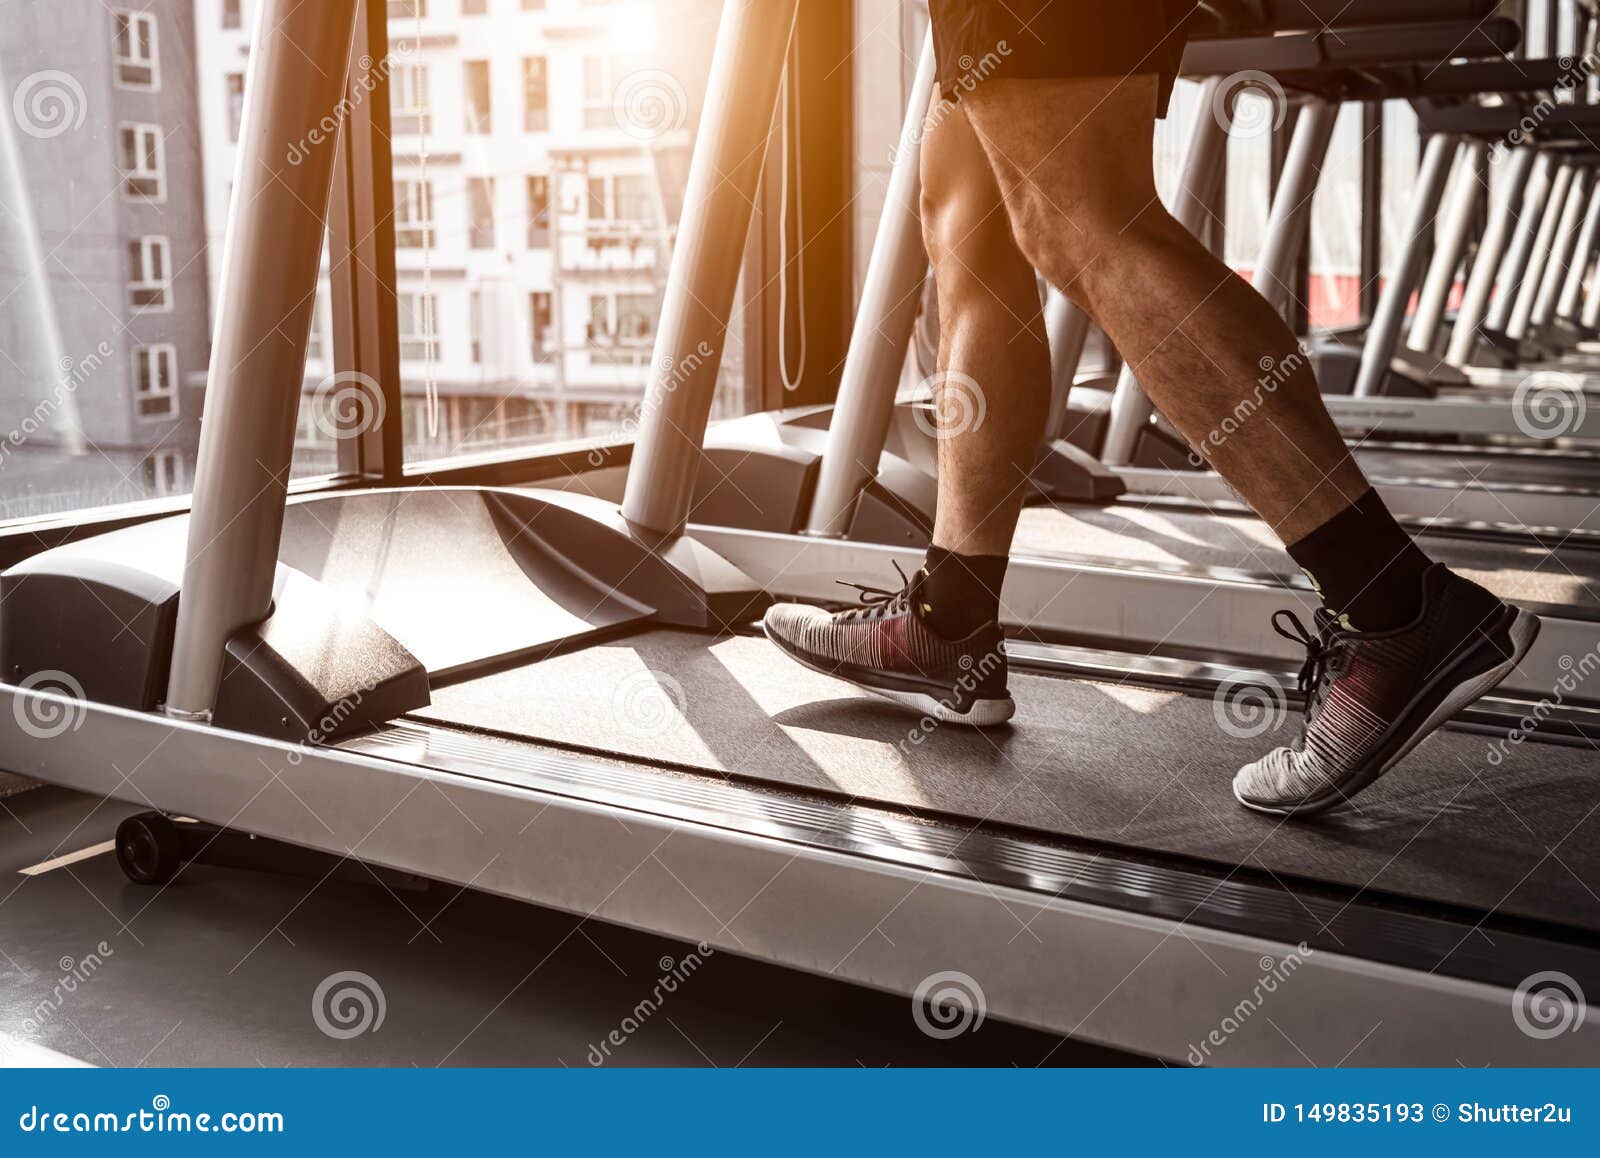 close up of sport man running on treadmill in fitness gym at condominium in urban. people lifestyles and sport activity concept